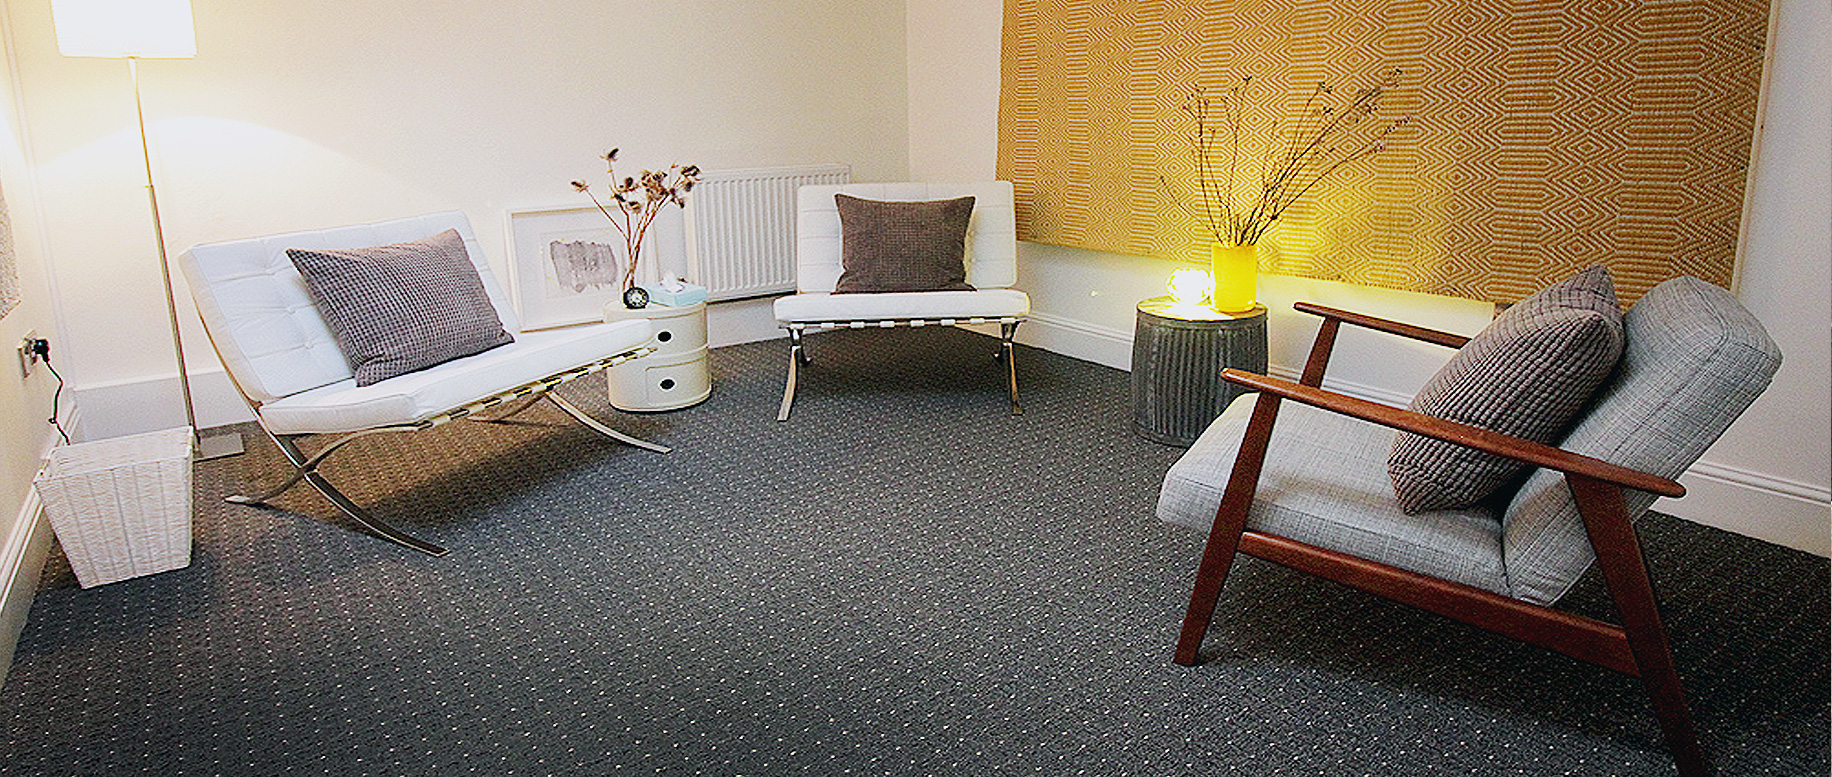 HQ Therapy Rooms Haggerston London E8 Therapists Hang Out Room 11